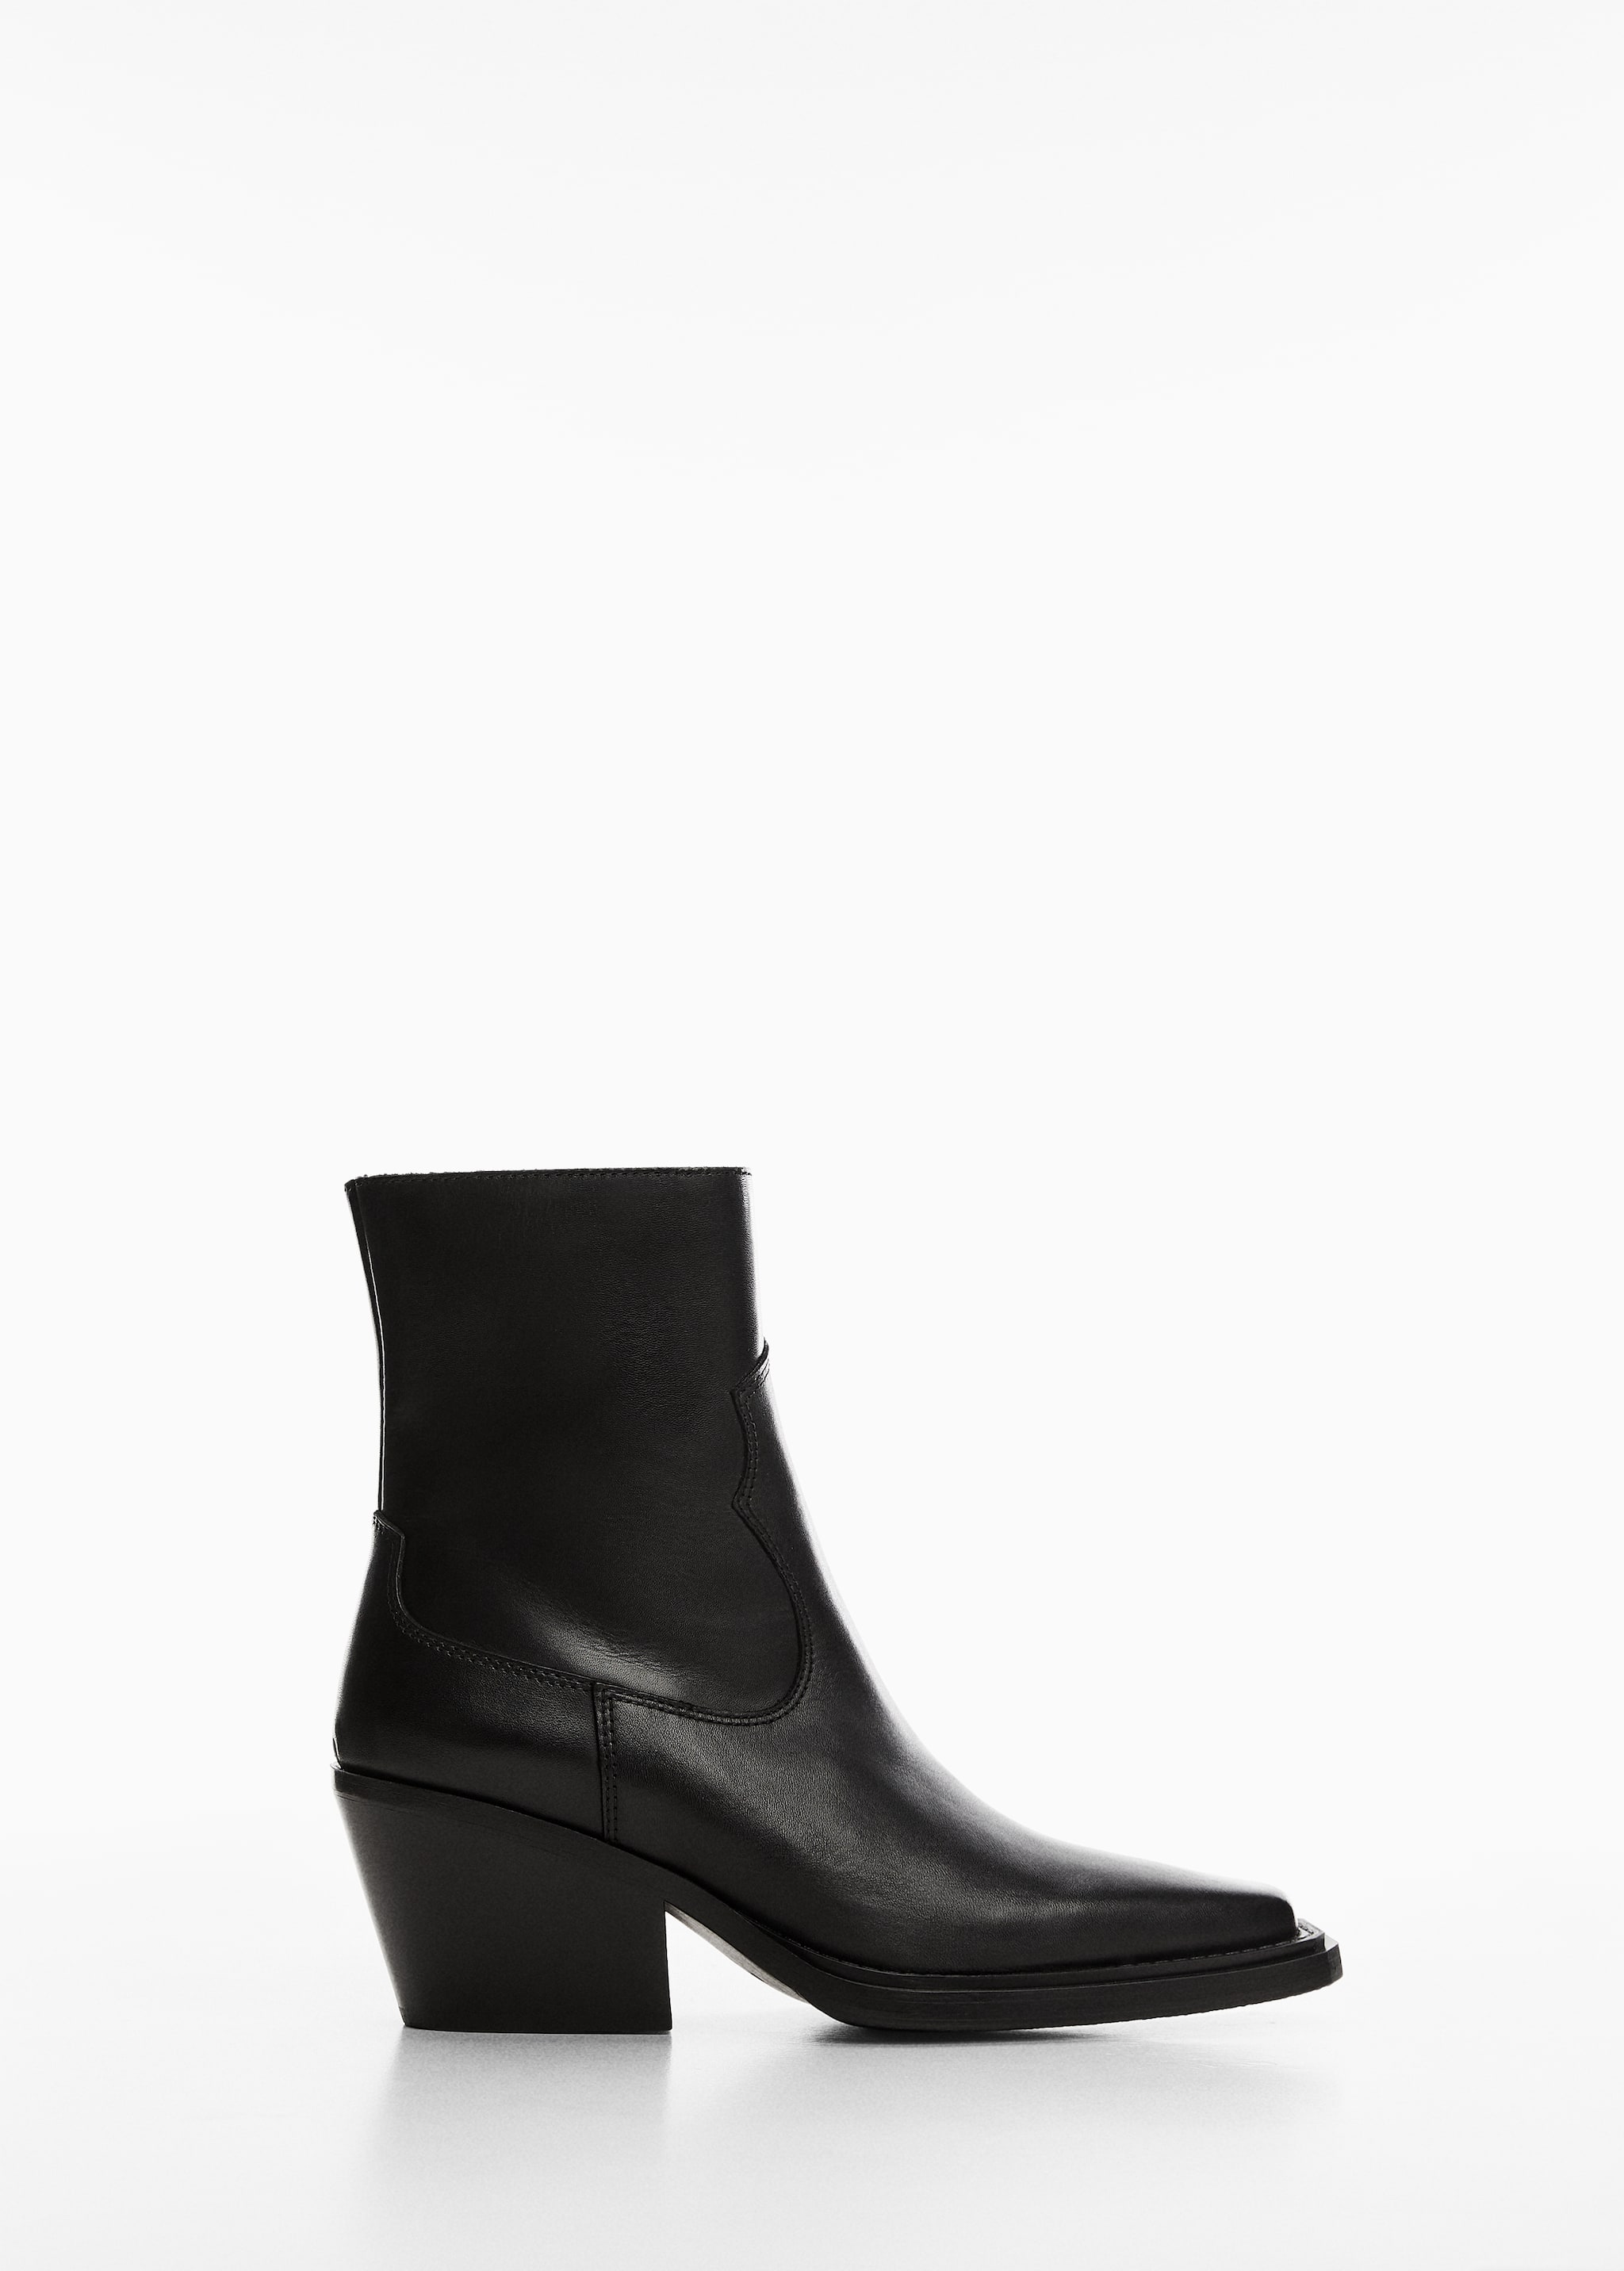 Leather cowboy ankle boots - Article without model